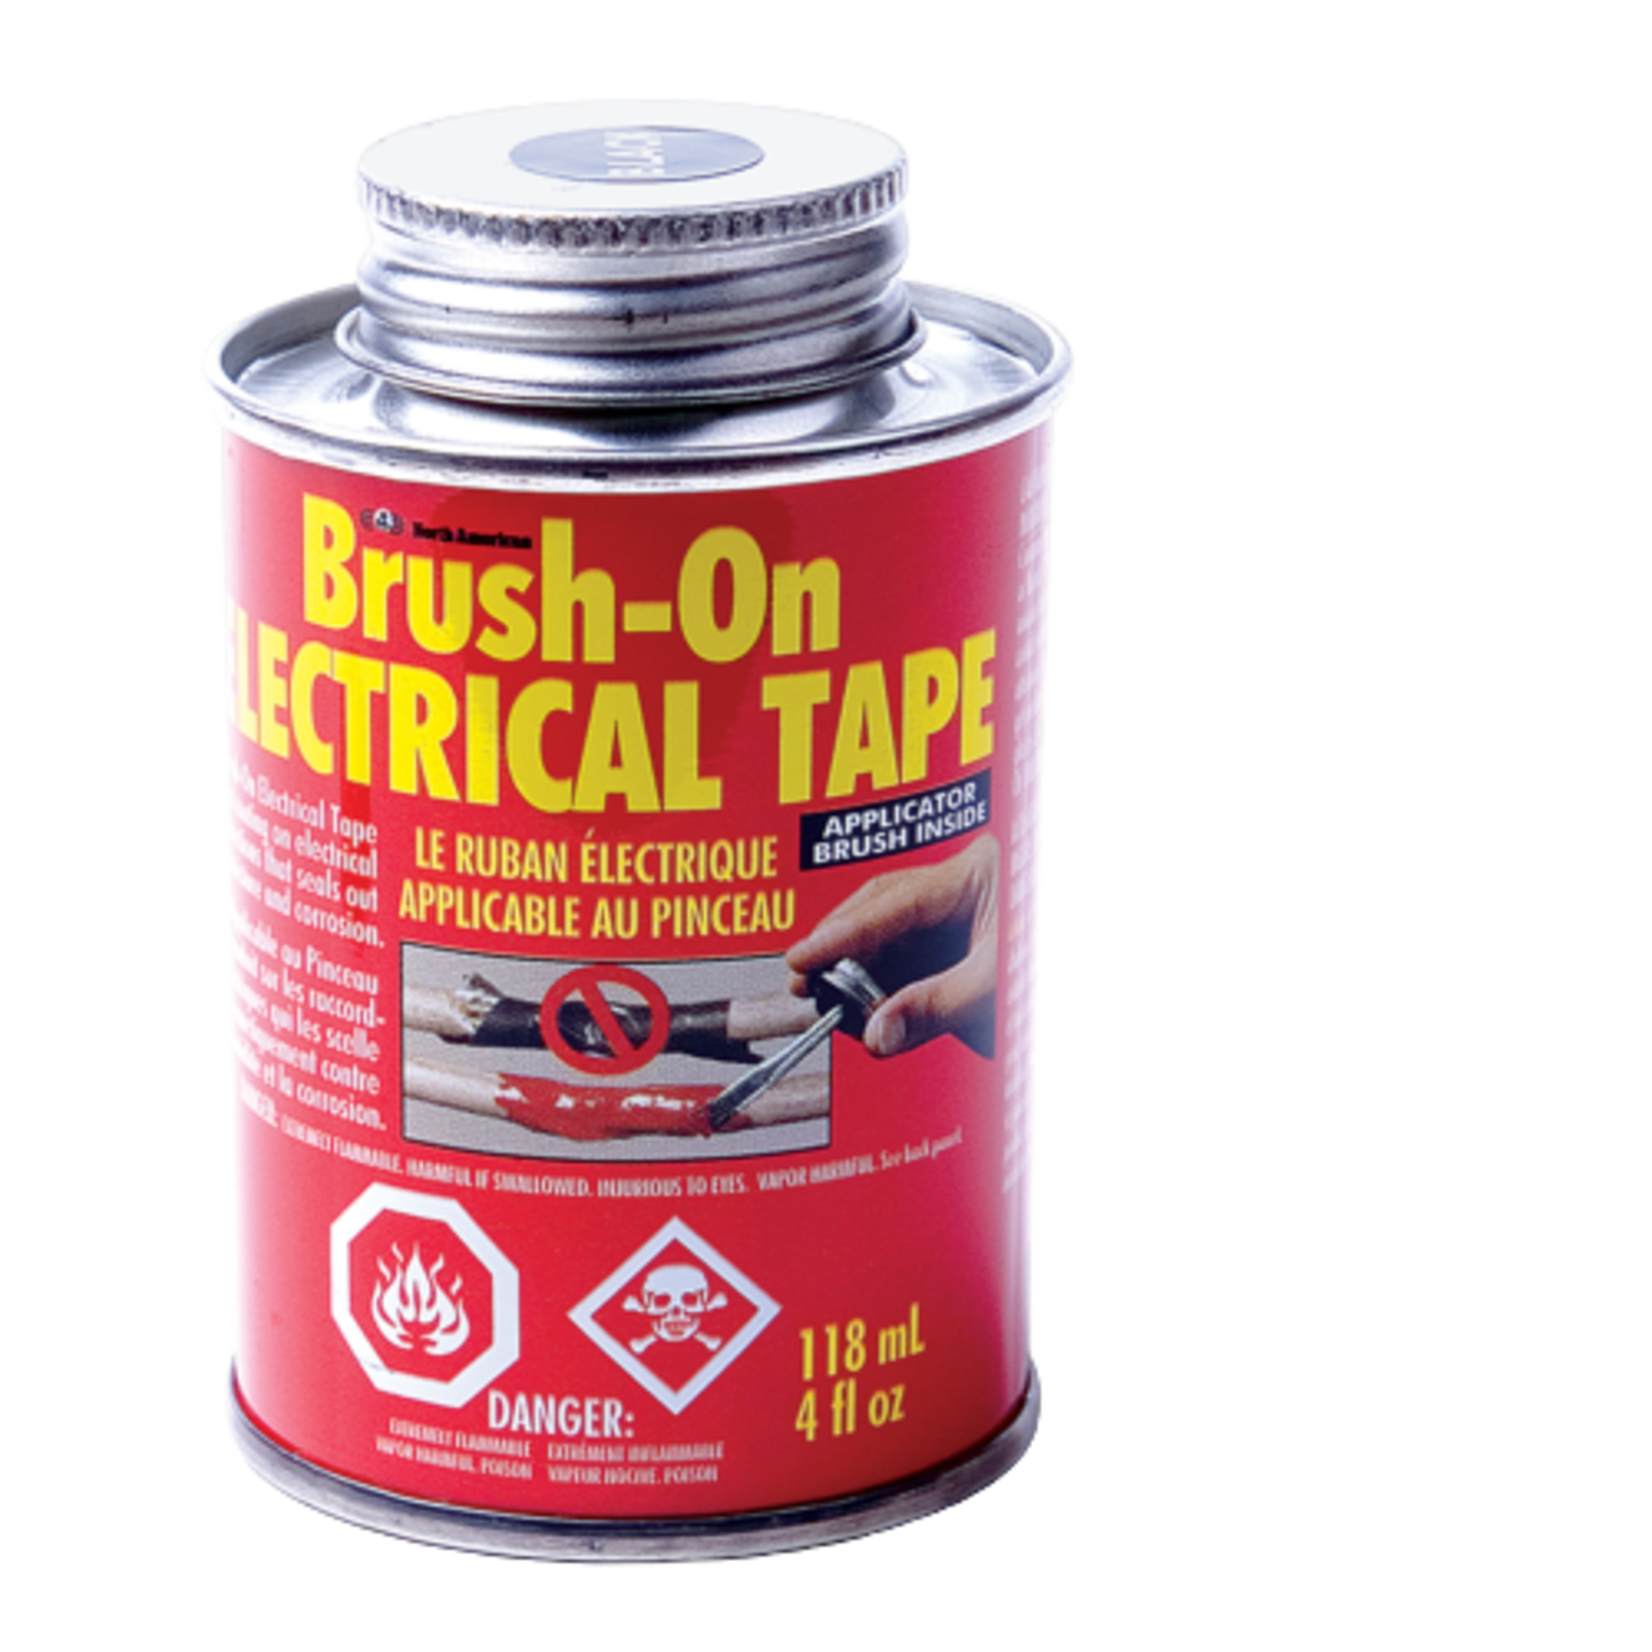 BRUSH-ON ELECTRICAL TAPE - RED